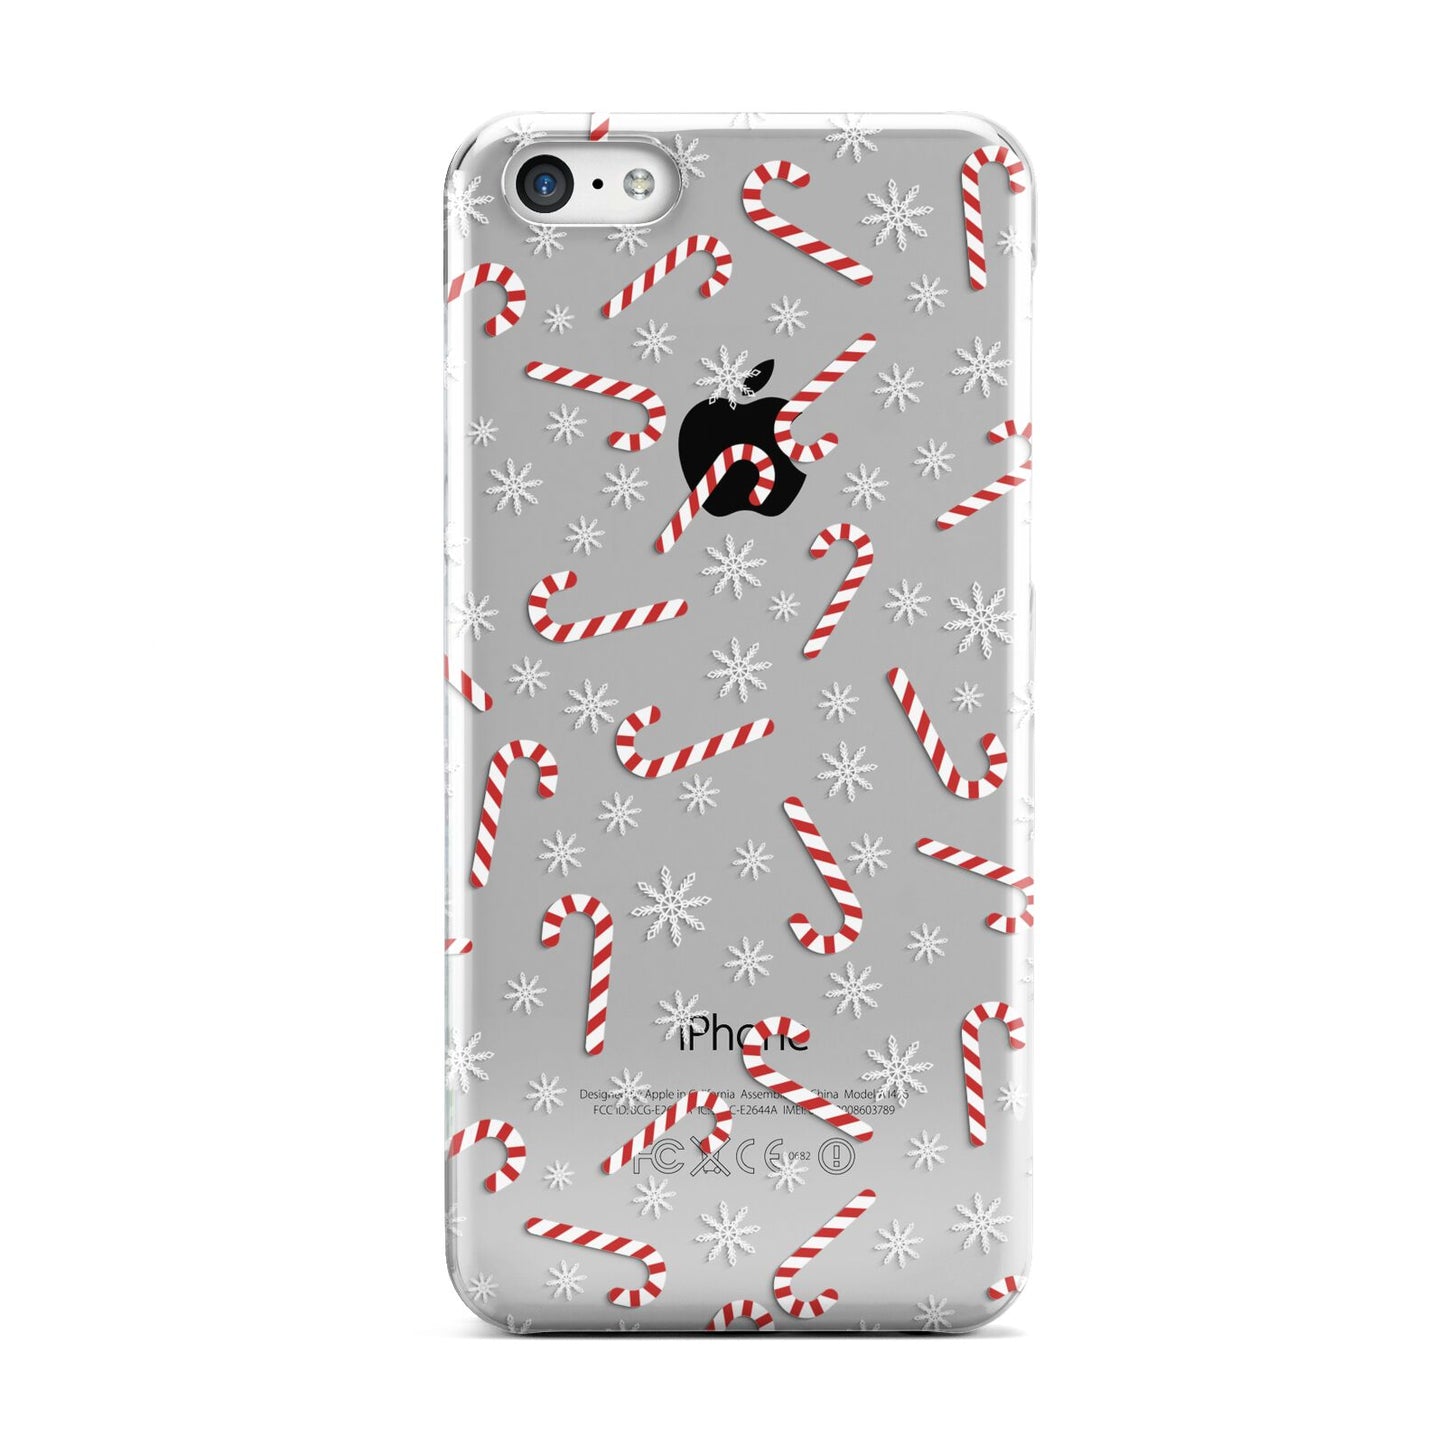 Candy Cane Apple iPhone 5c Case